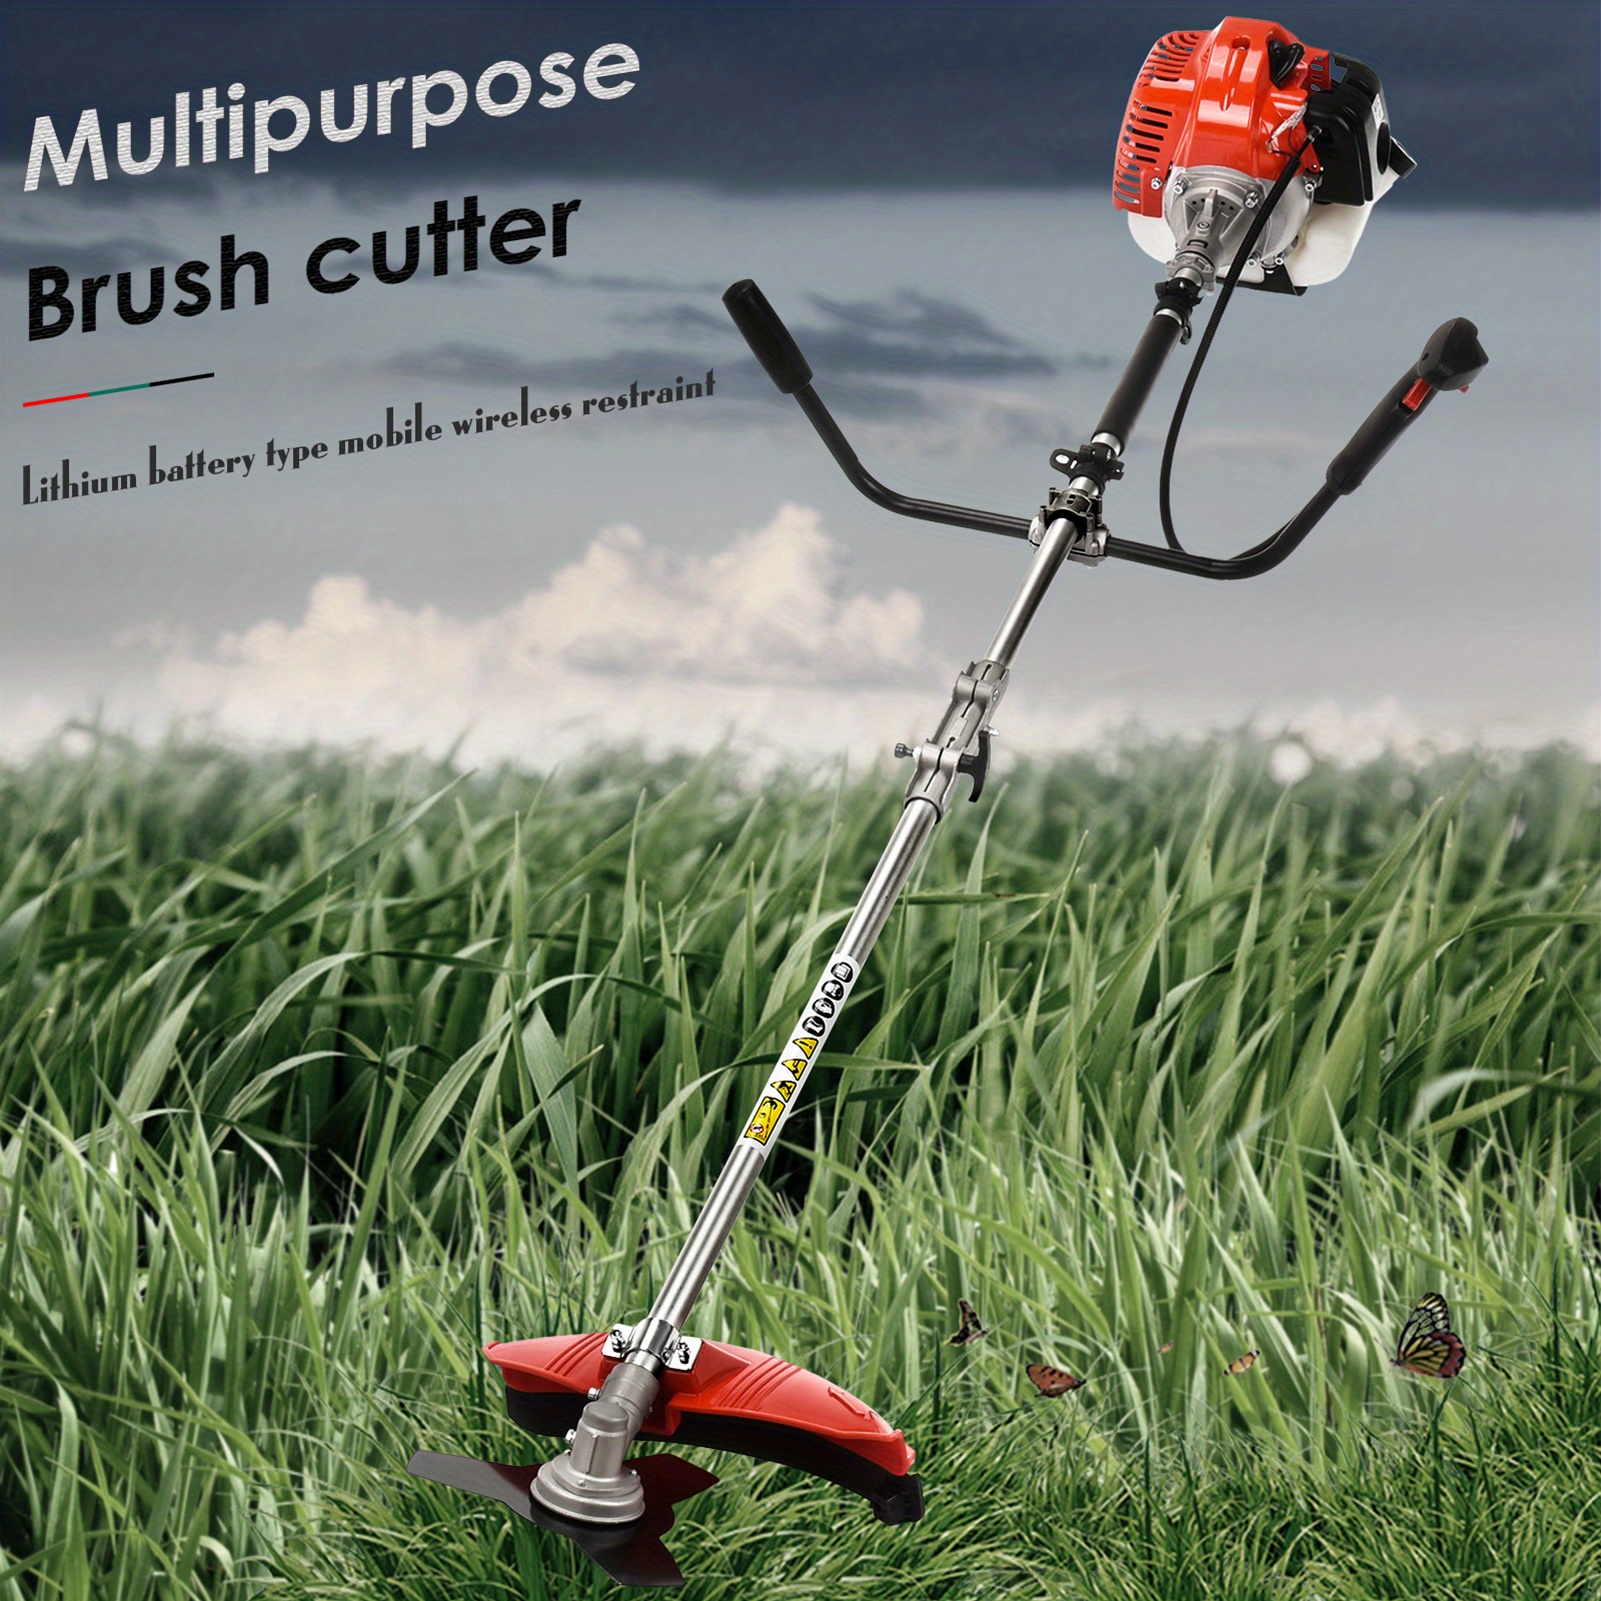 

Multipurpose 2-in-1 Gasoline Brush Cutter & , 70.86x13.77 Inches, Cordless String Trimmer Edger, Lawn Care Tool For Garden And Yard